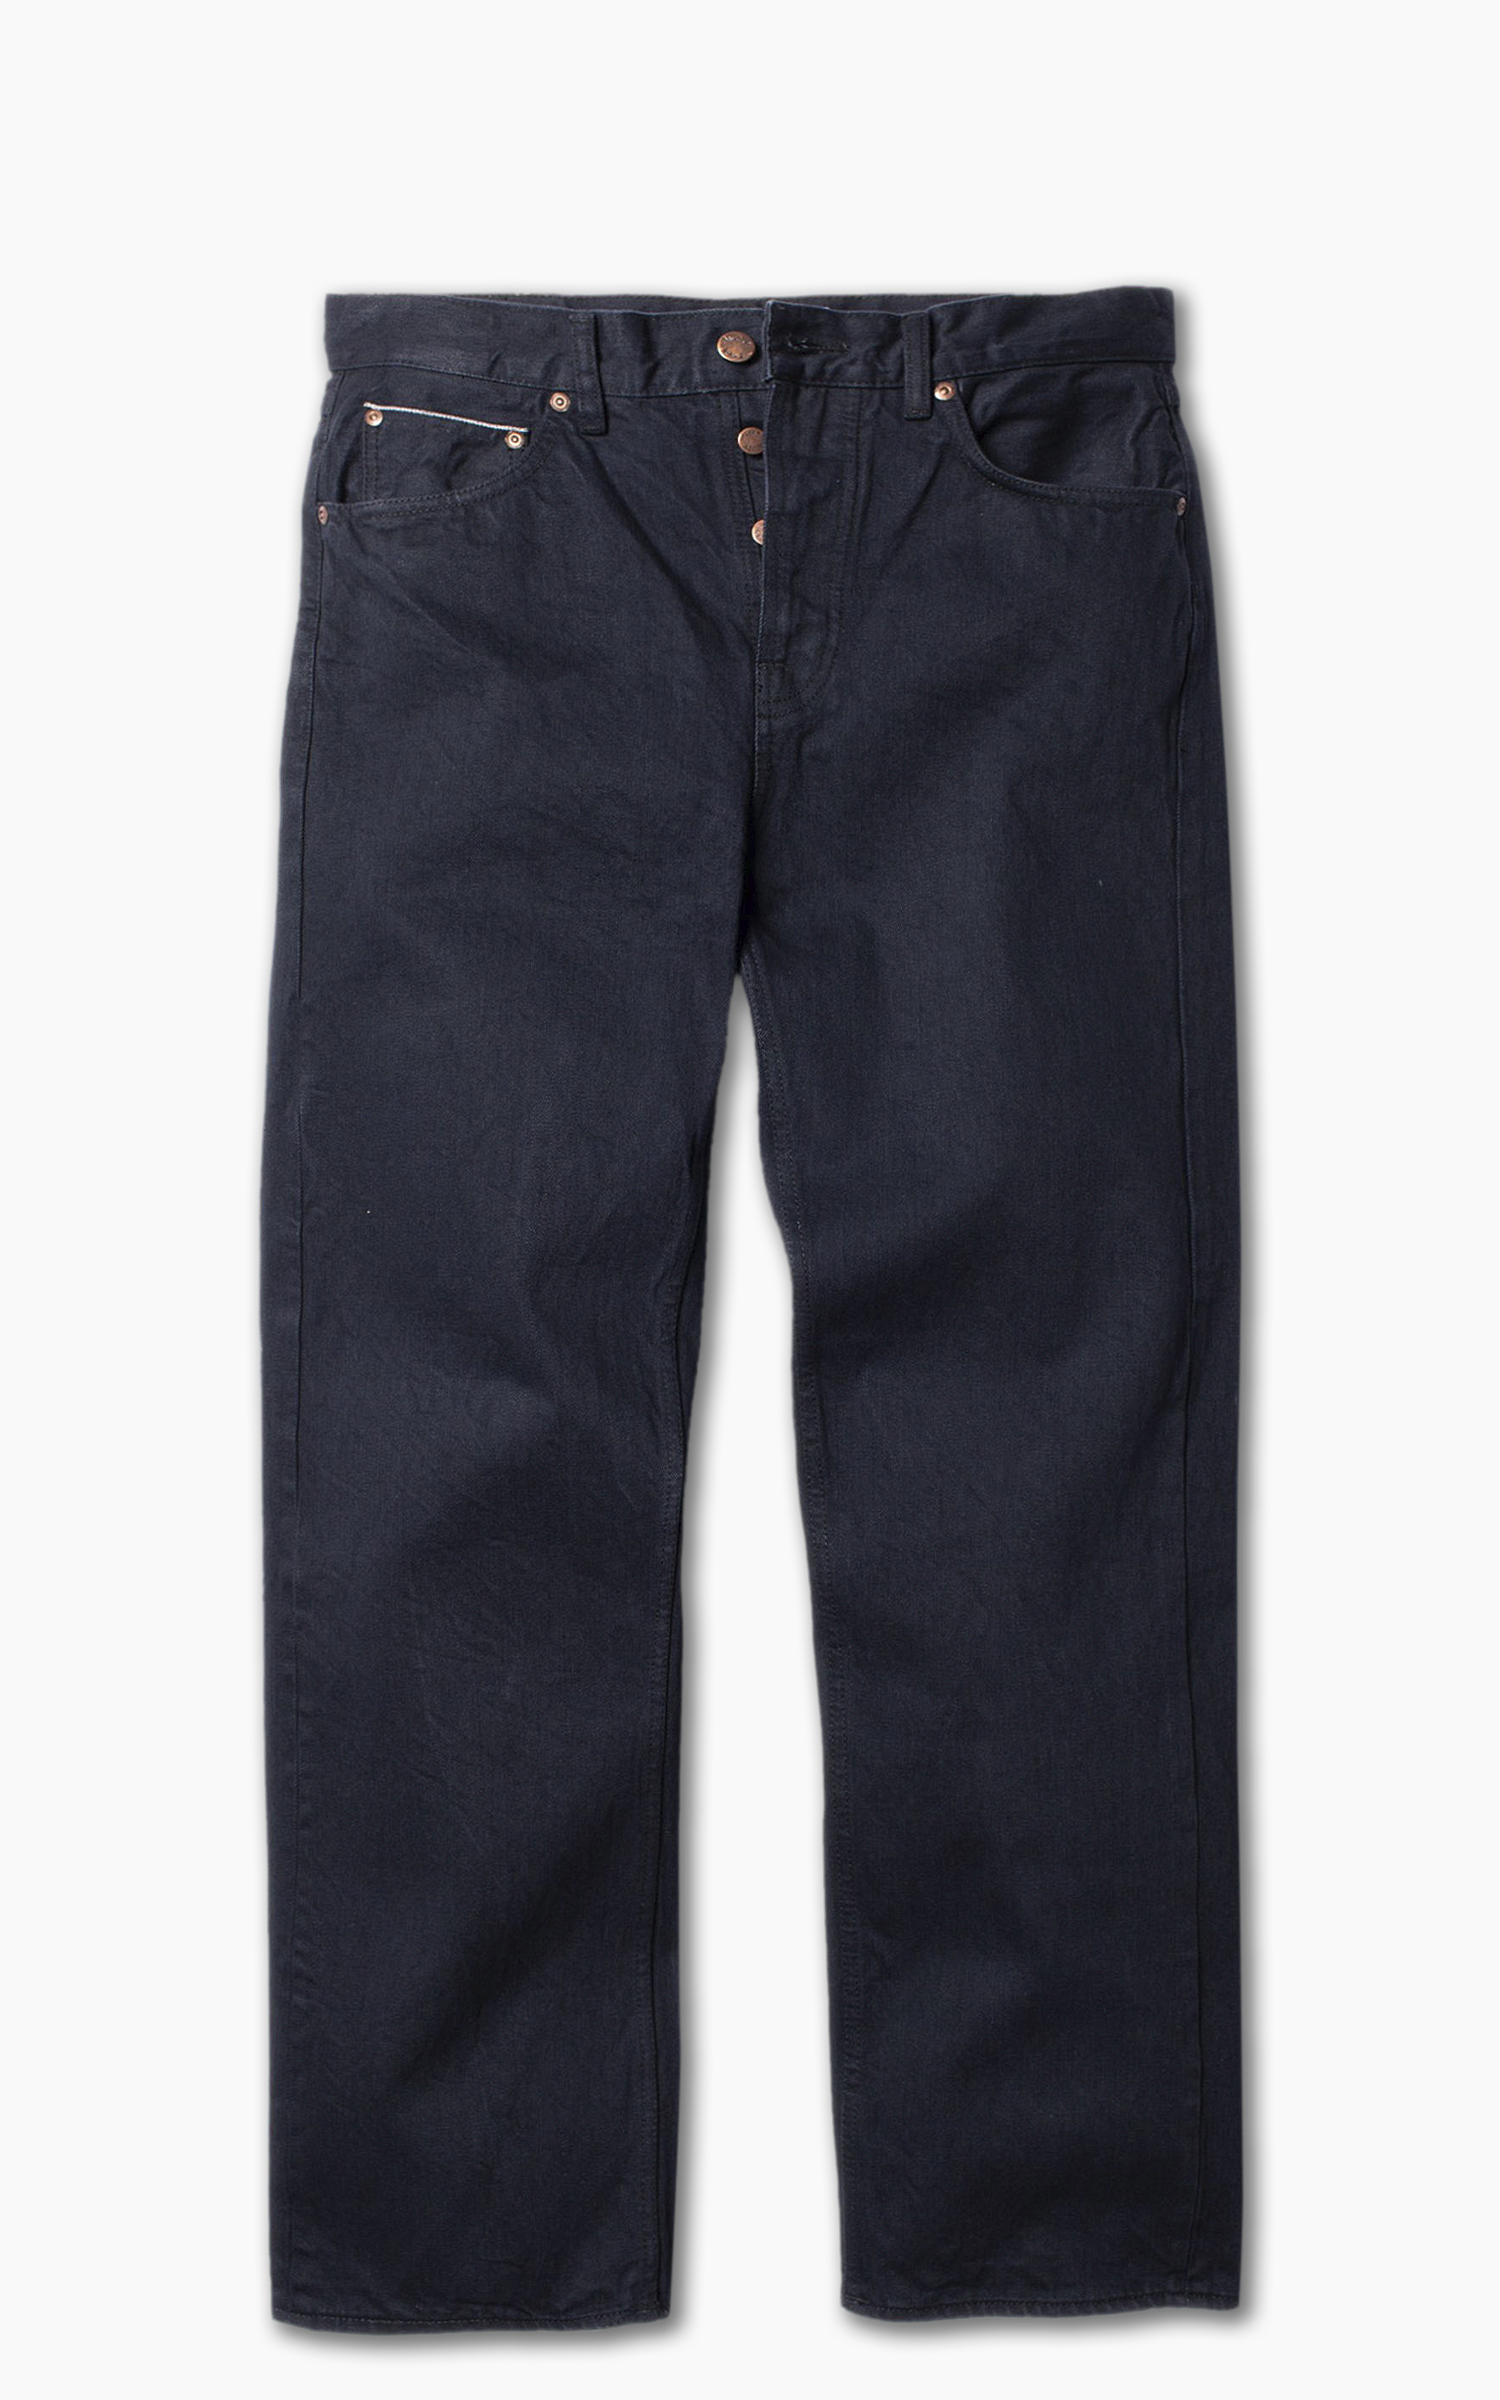 Nudie Jeans Tuff Tony Rinse Onyx Selvage | Cultizm